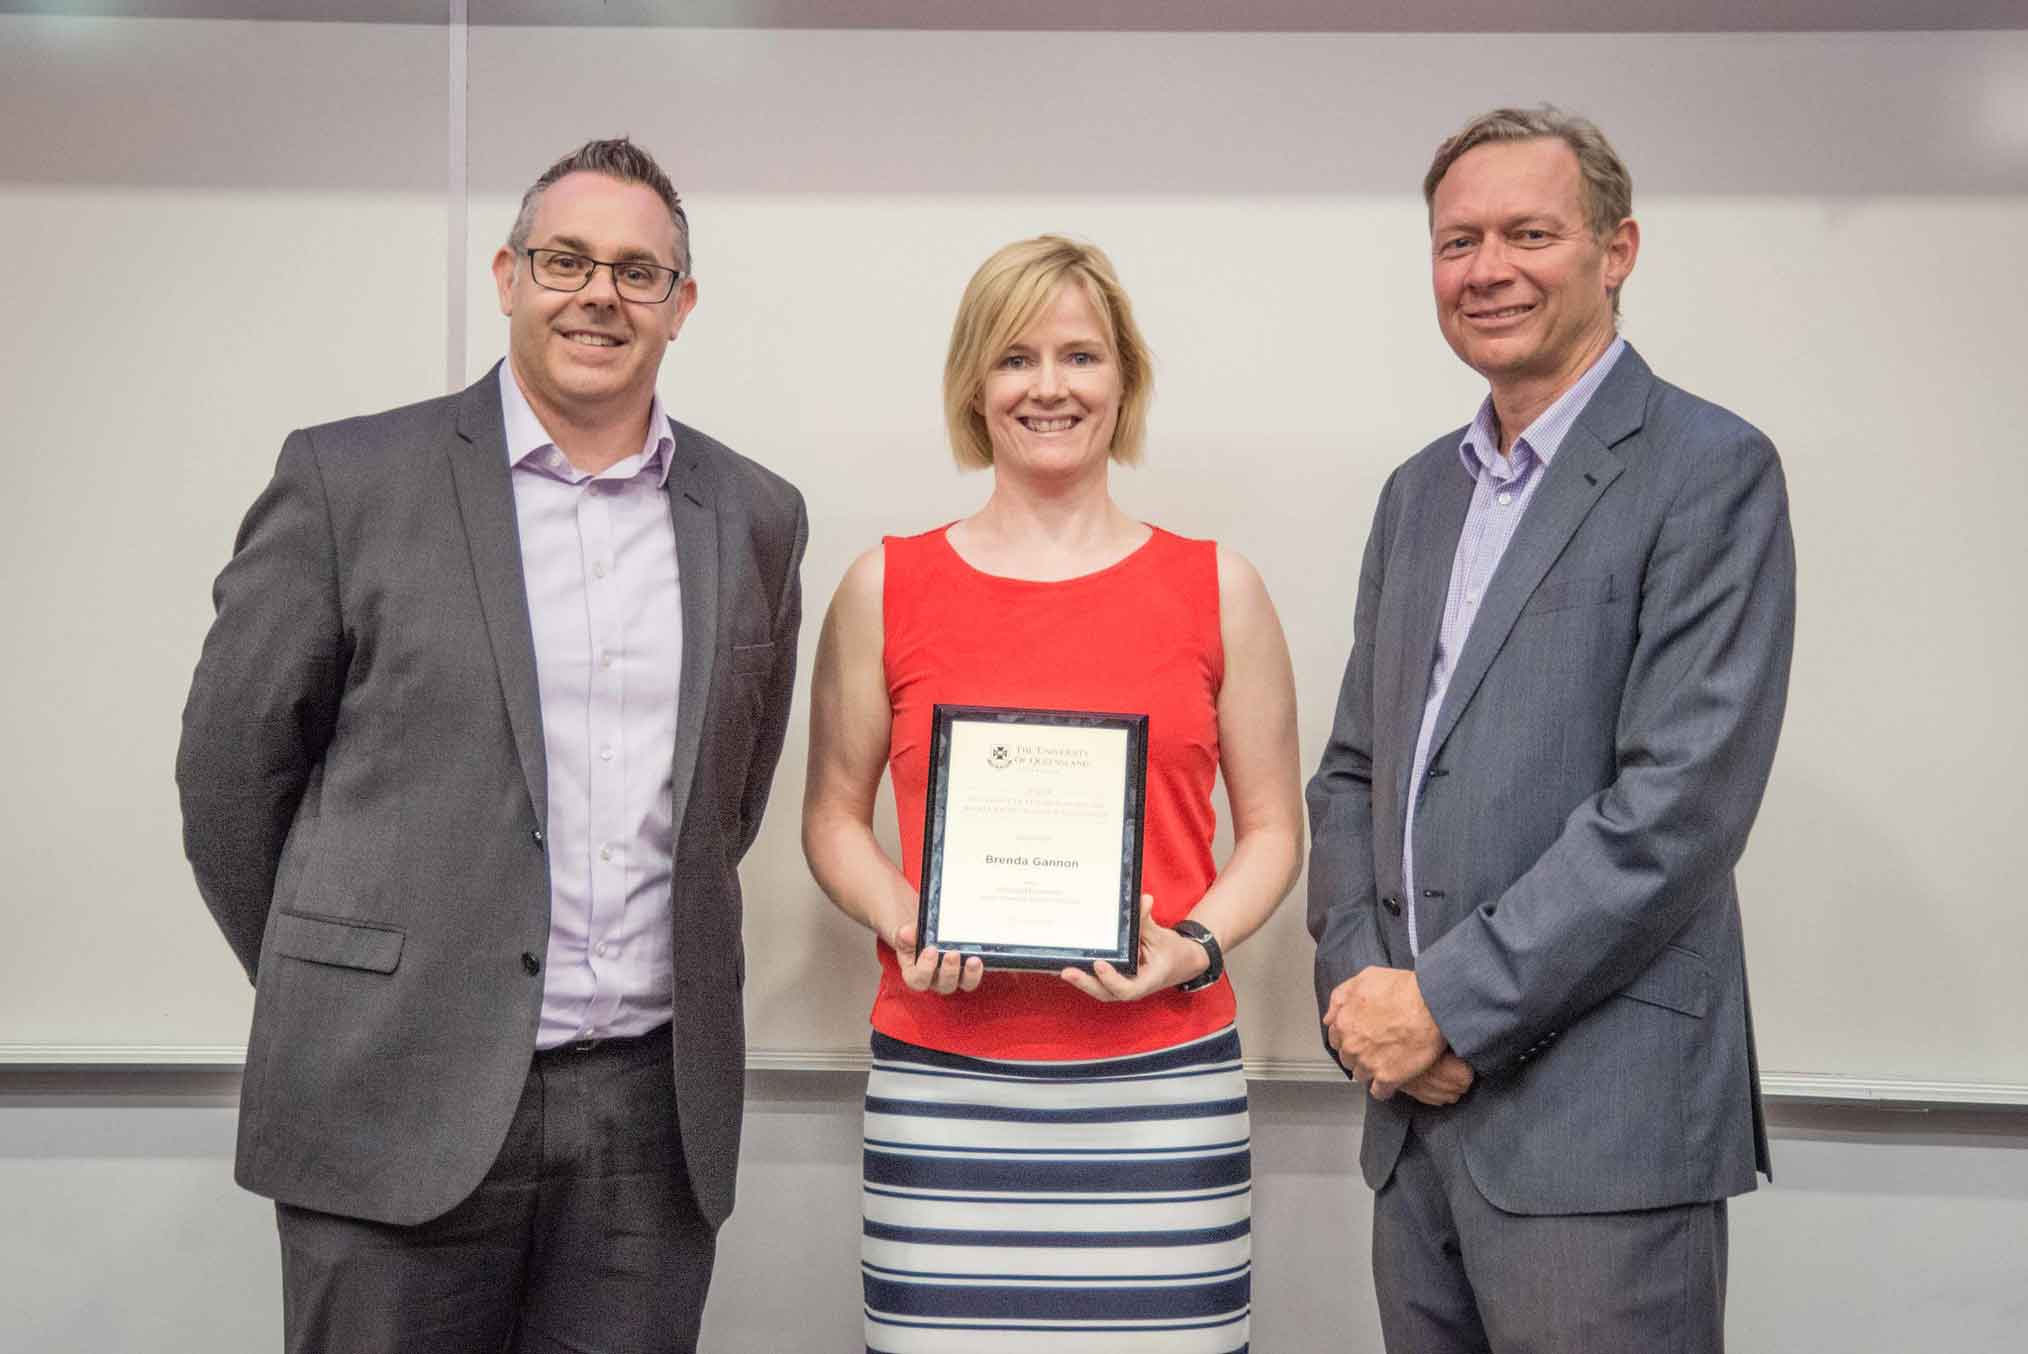 This is an image of Professor Brent Ritchie, award-winner Professor Brenda Gannon, and Professor Andrew Griffiths